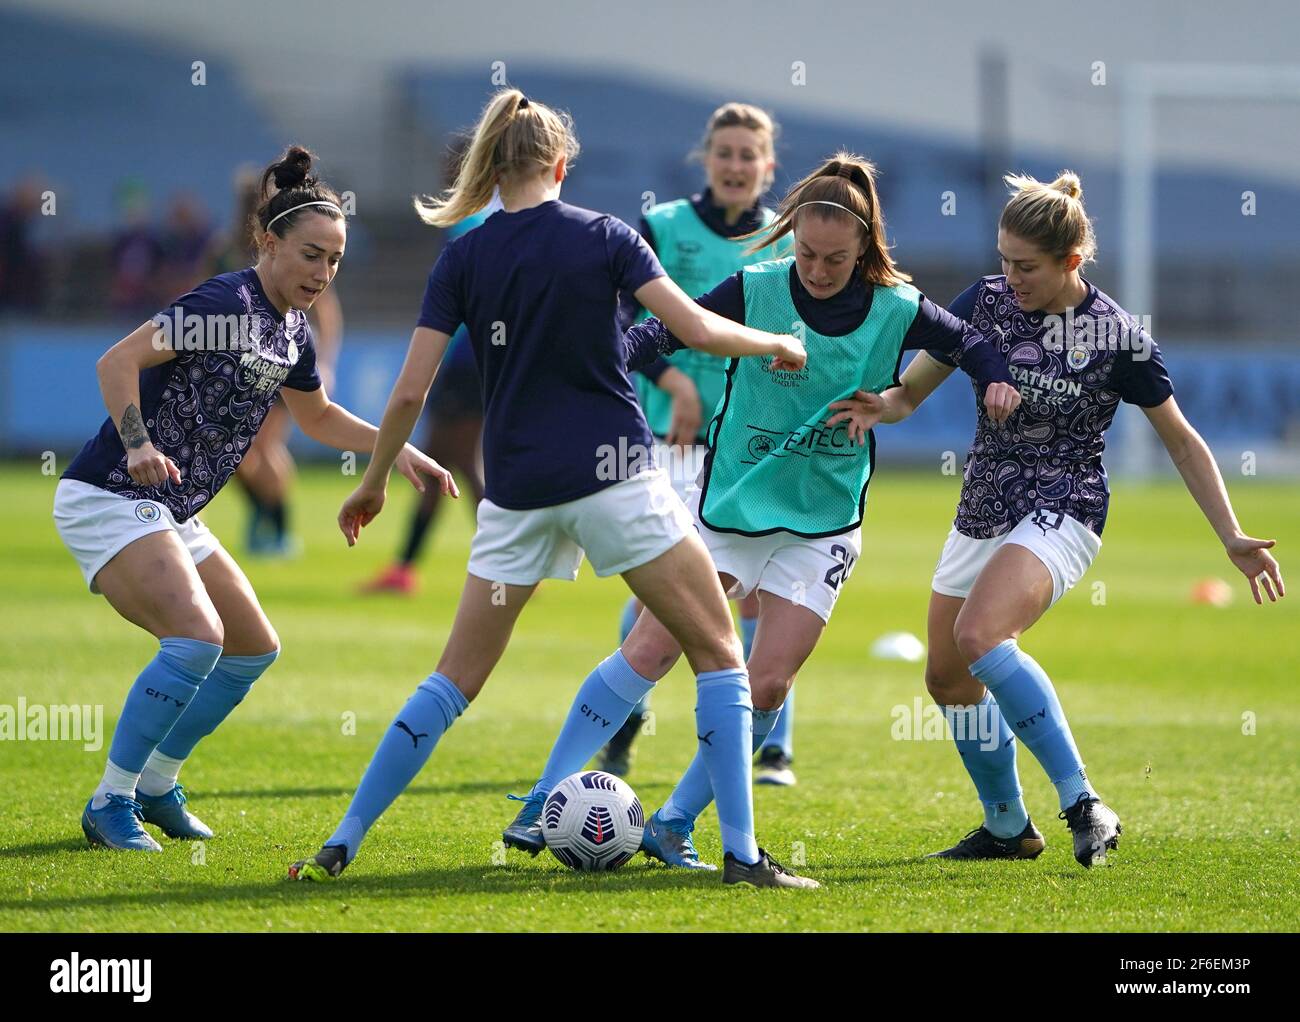 Manchester City's Keira Walsh (centre right) warming up before the 2021 UEFA Women's Champions League match at the Manchester City Academy Stadium, Manchester. Picture date: Wednesday March 31, 2021. Stock Photo